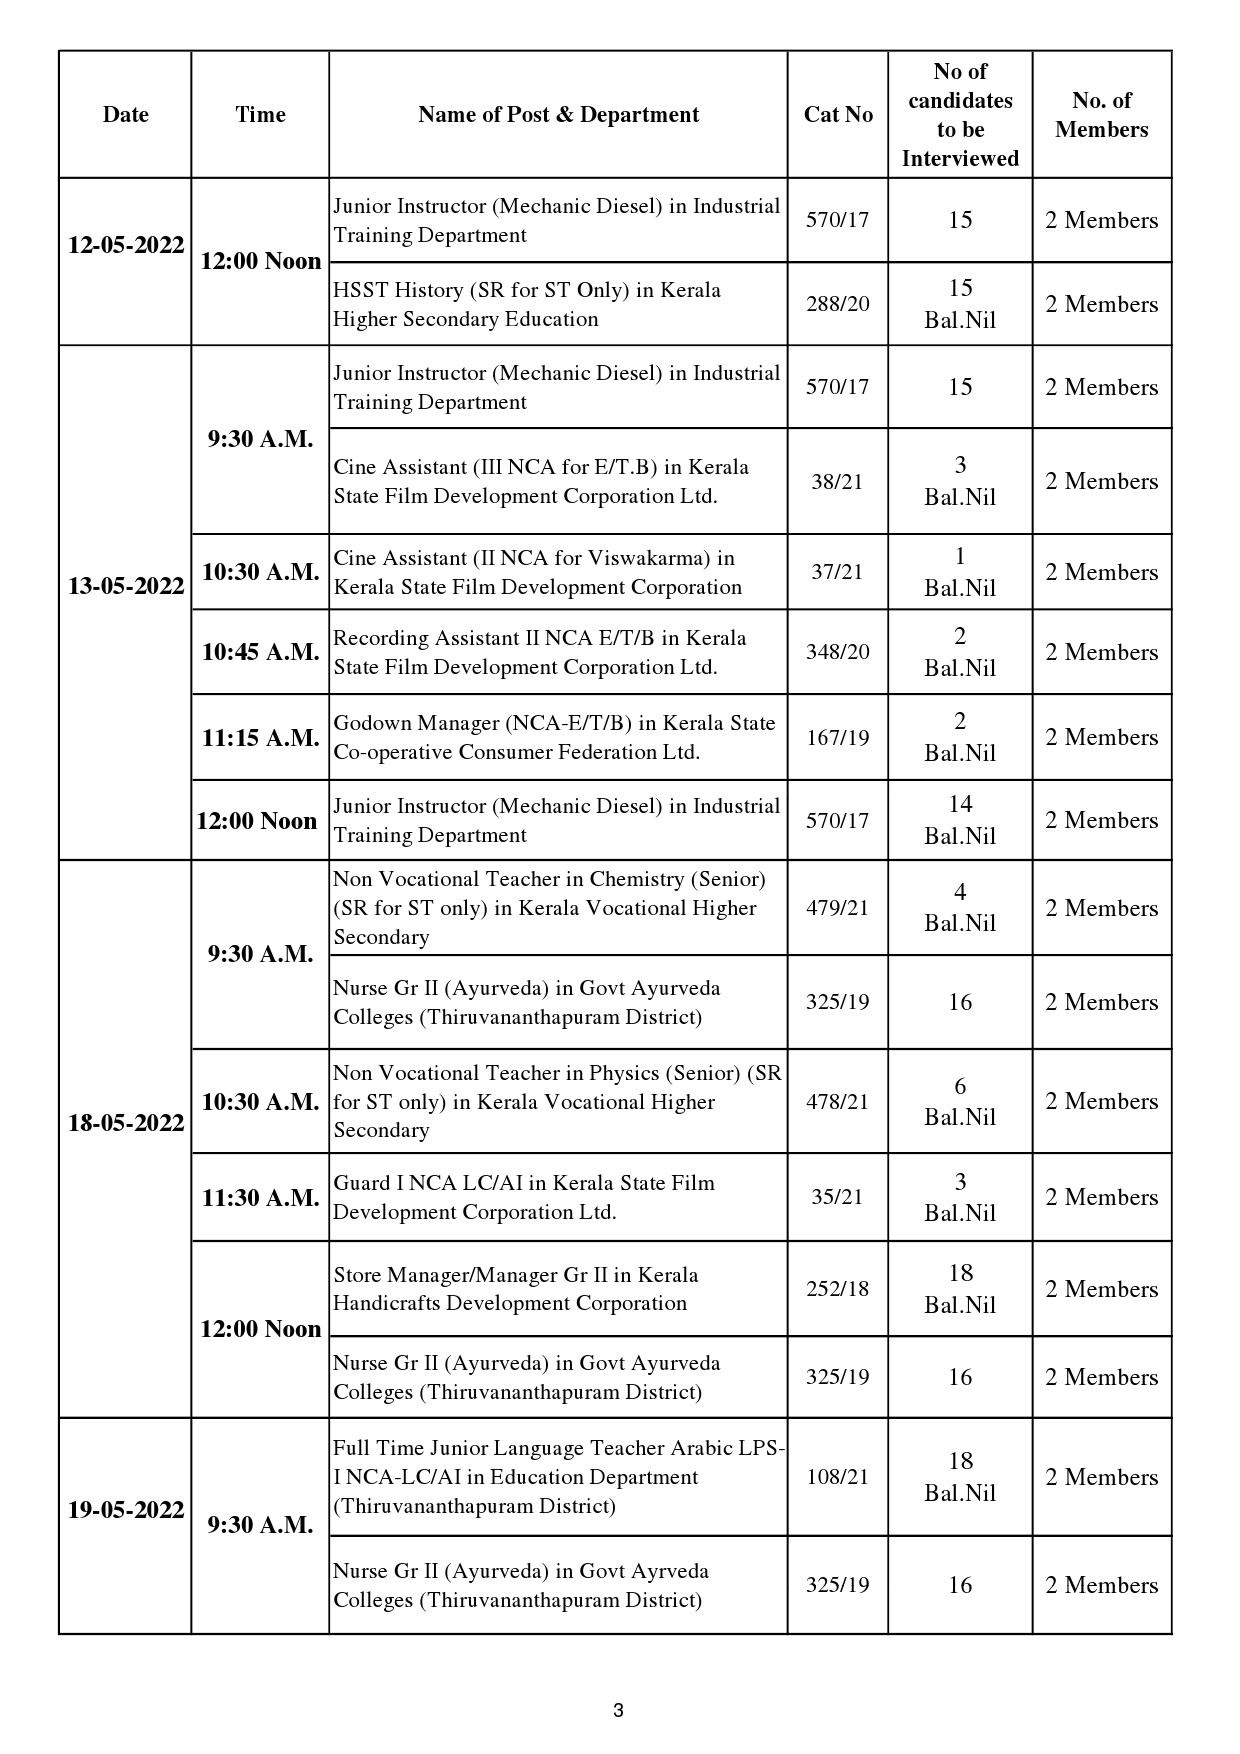 KPSC INTERVIEW PROGRAMME FOR THE MONTH OF MAY 2022 - Notification Image 3